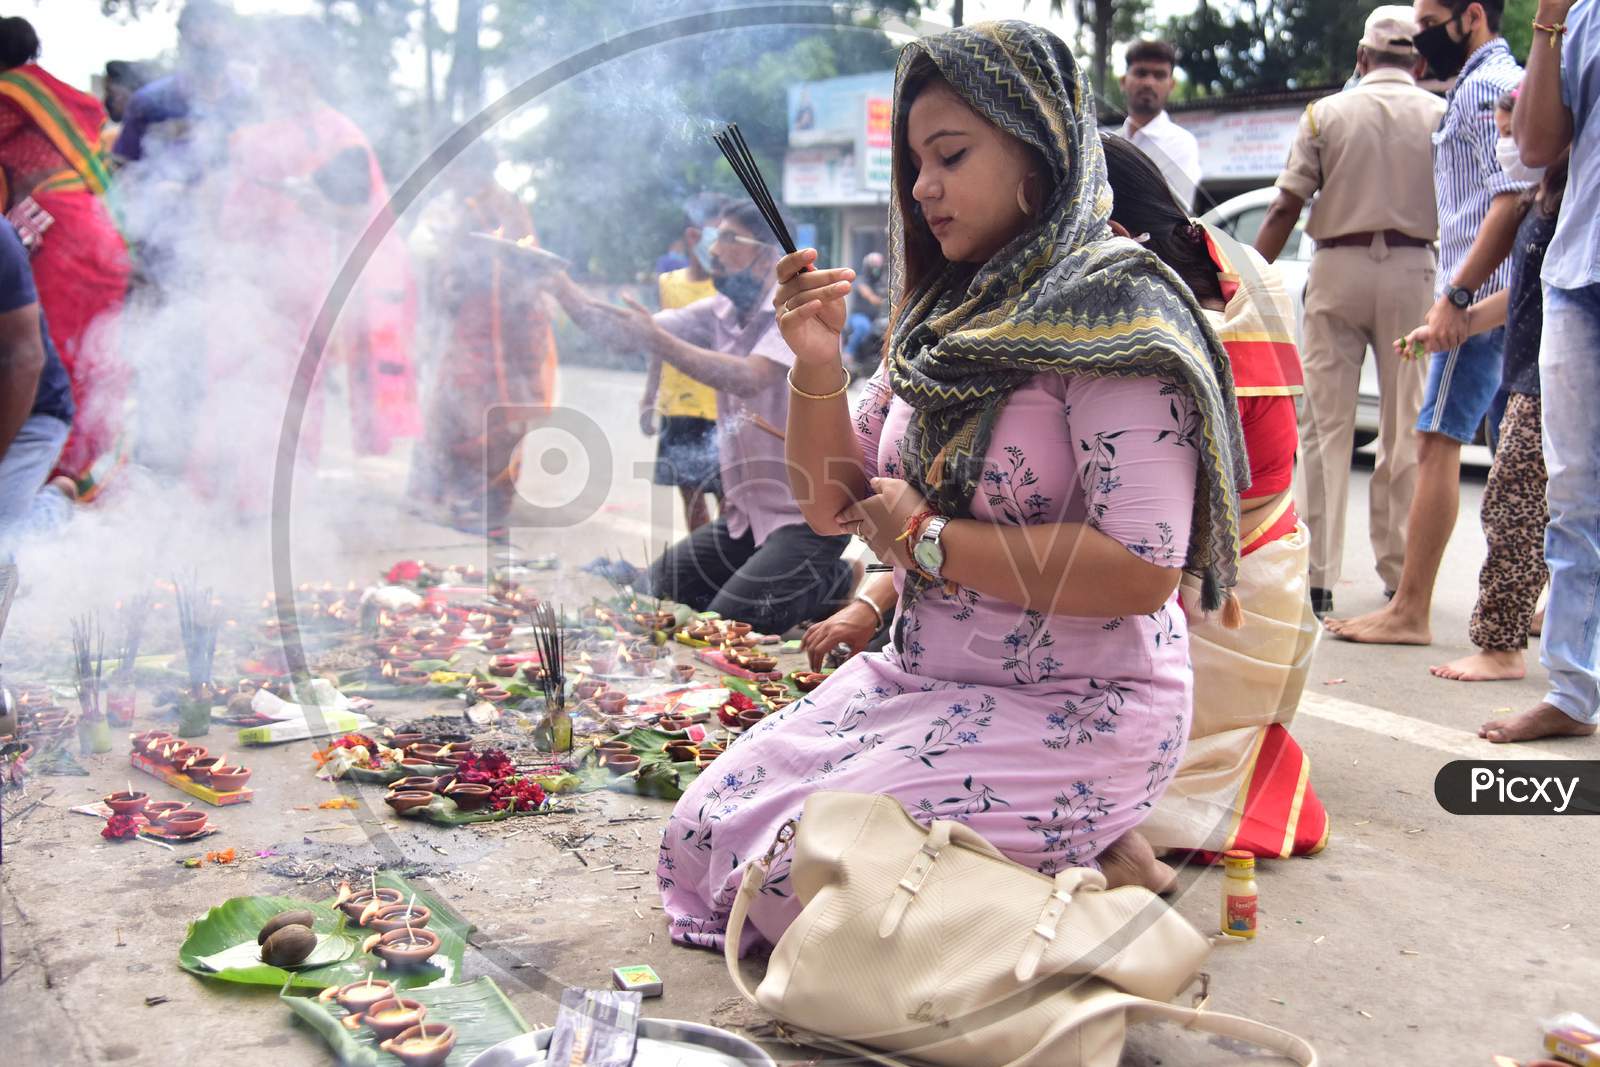 Devotees Offer Prayers To Lord Ganesha On The Occasion Of  Ganesh Chaturthi Festival In Nagaon District Of Assam On August 22,2020.